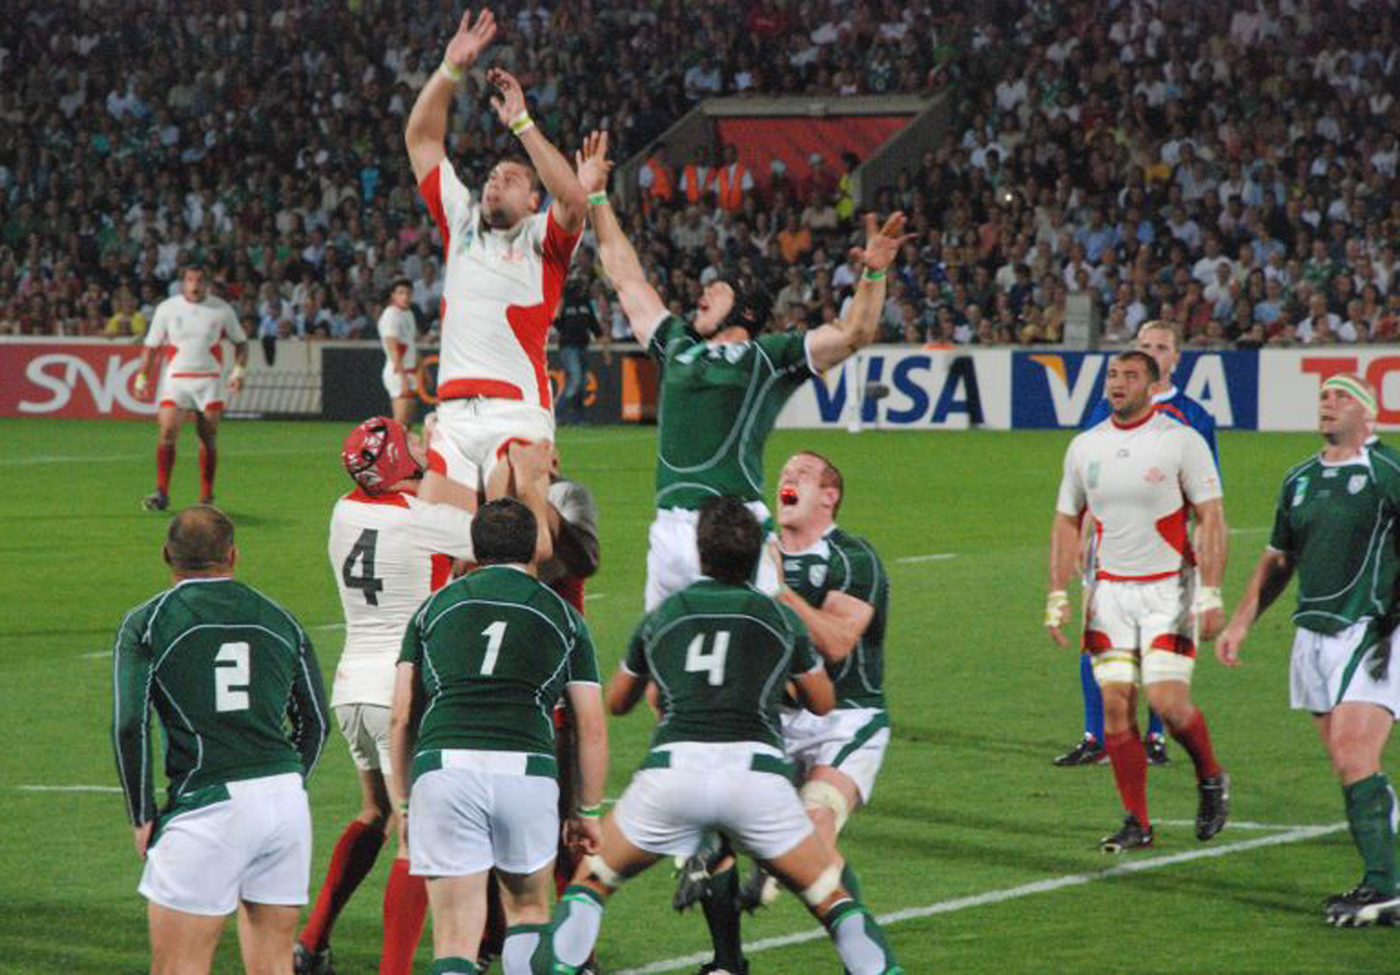 Photo of Ireland and Georgia contesting a line-out in the 2007 Rugby World Cup by M+MD (Ireland V Georgia Rugby) via Wikimedia Commons.